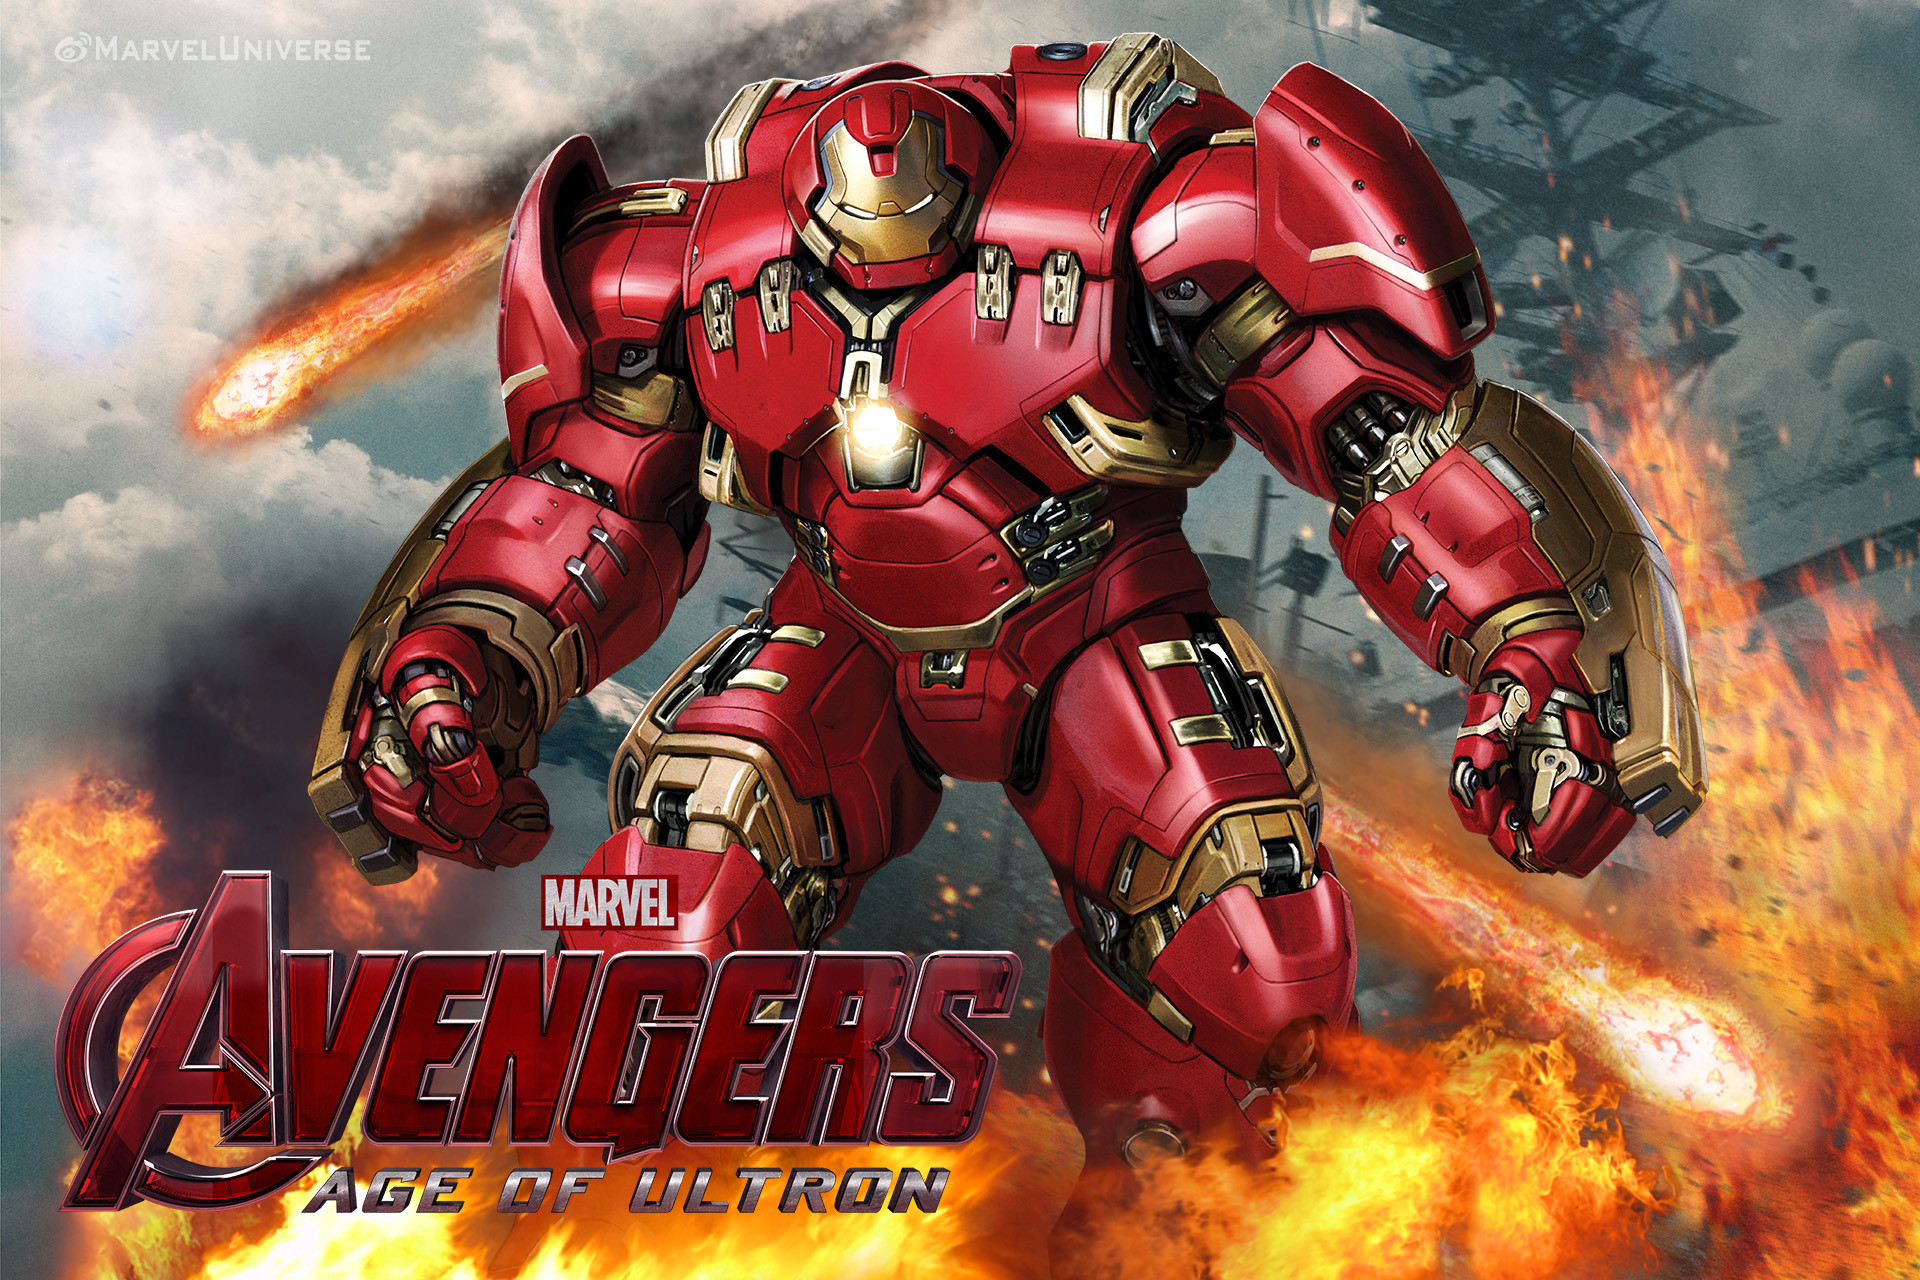 1920x1280 Age of Ultron Iron Man Hulk Buster by Chenshijie9095 on 